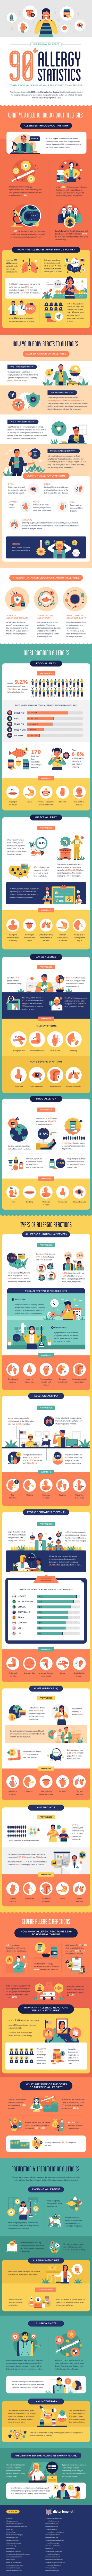 Learn How to React: 90+ Allergy Statistics (Infographic)